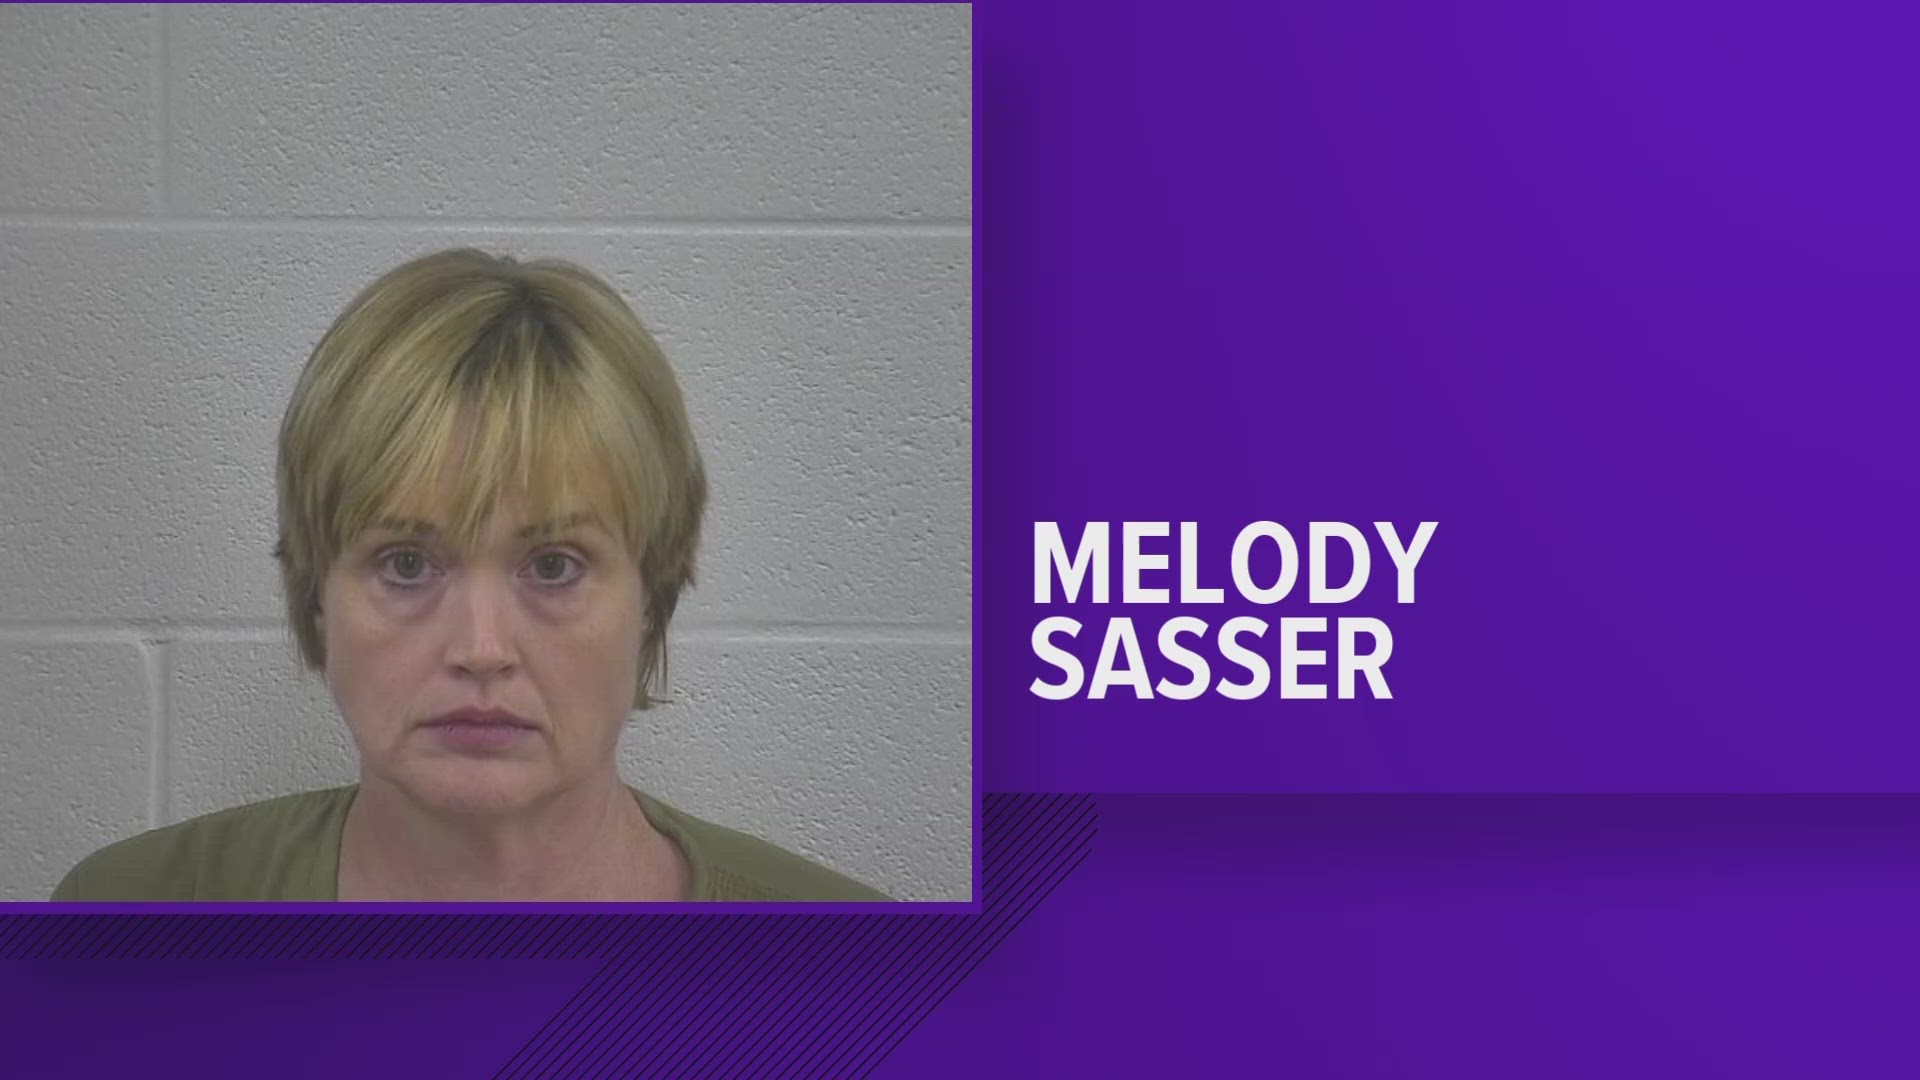 According to the government, Melody Sasser used a dark web site called Online Killers Market to try to kill someone she saw as a romantic rival.